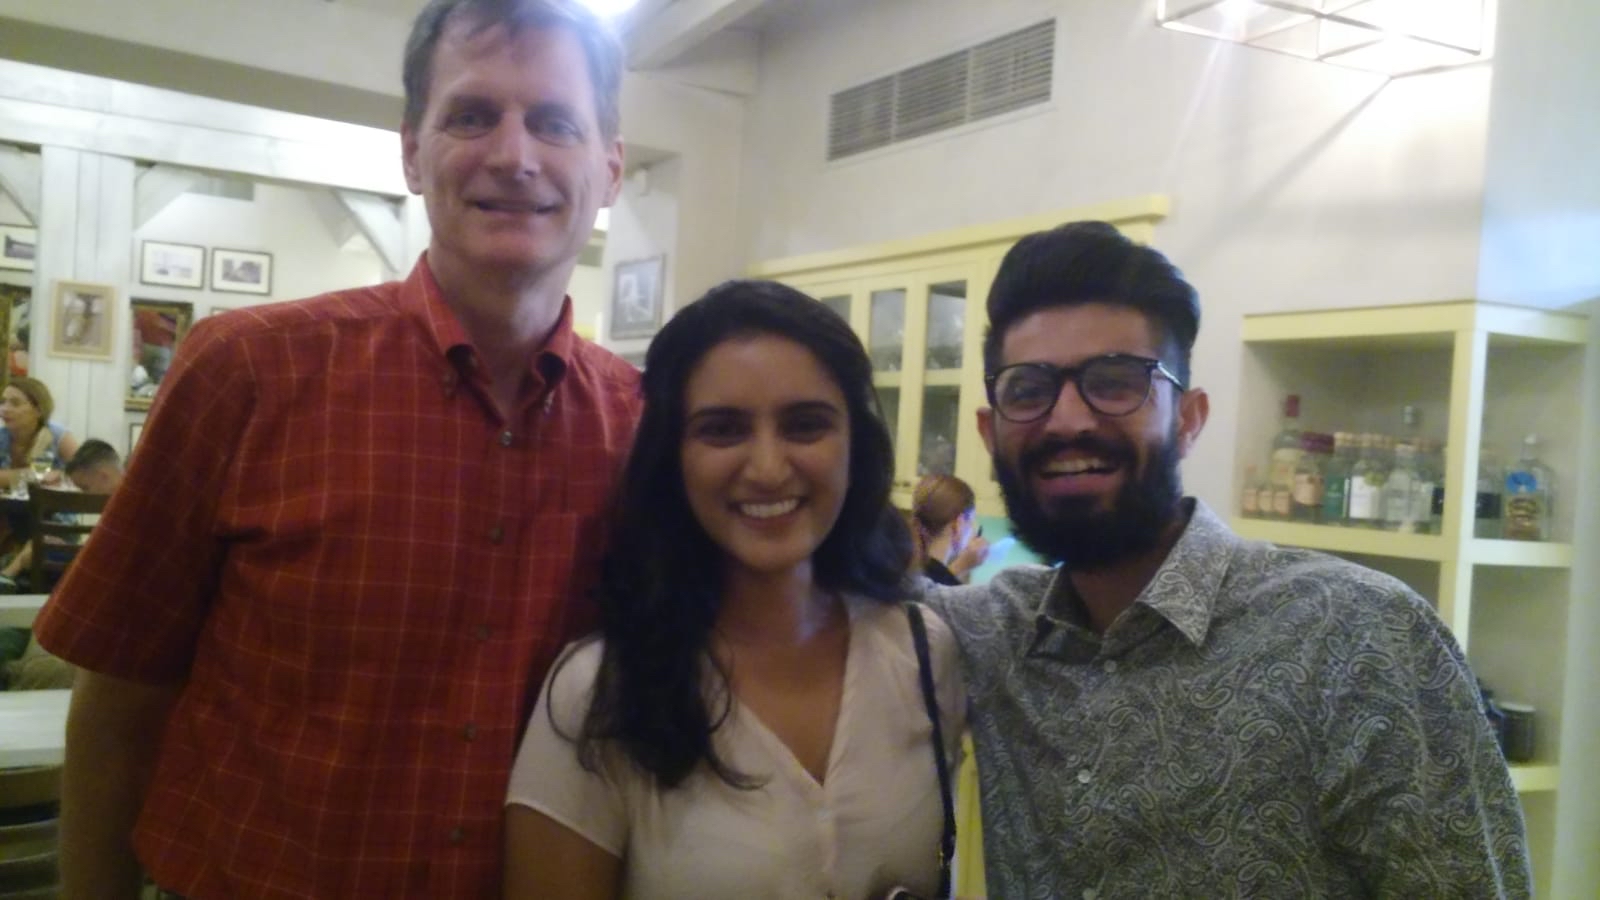 Divya Mishra pictured with Rizwan and her doctoral adviser, Dr. Peter Winch